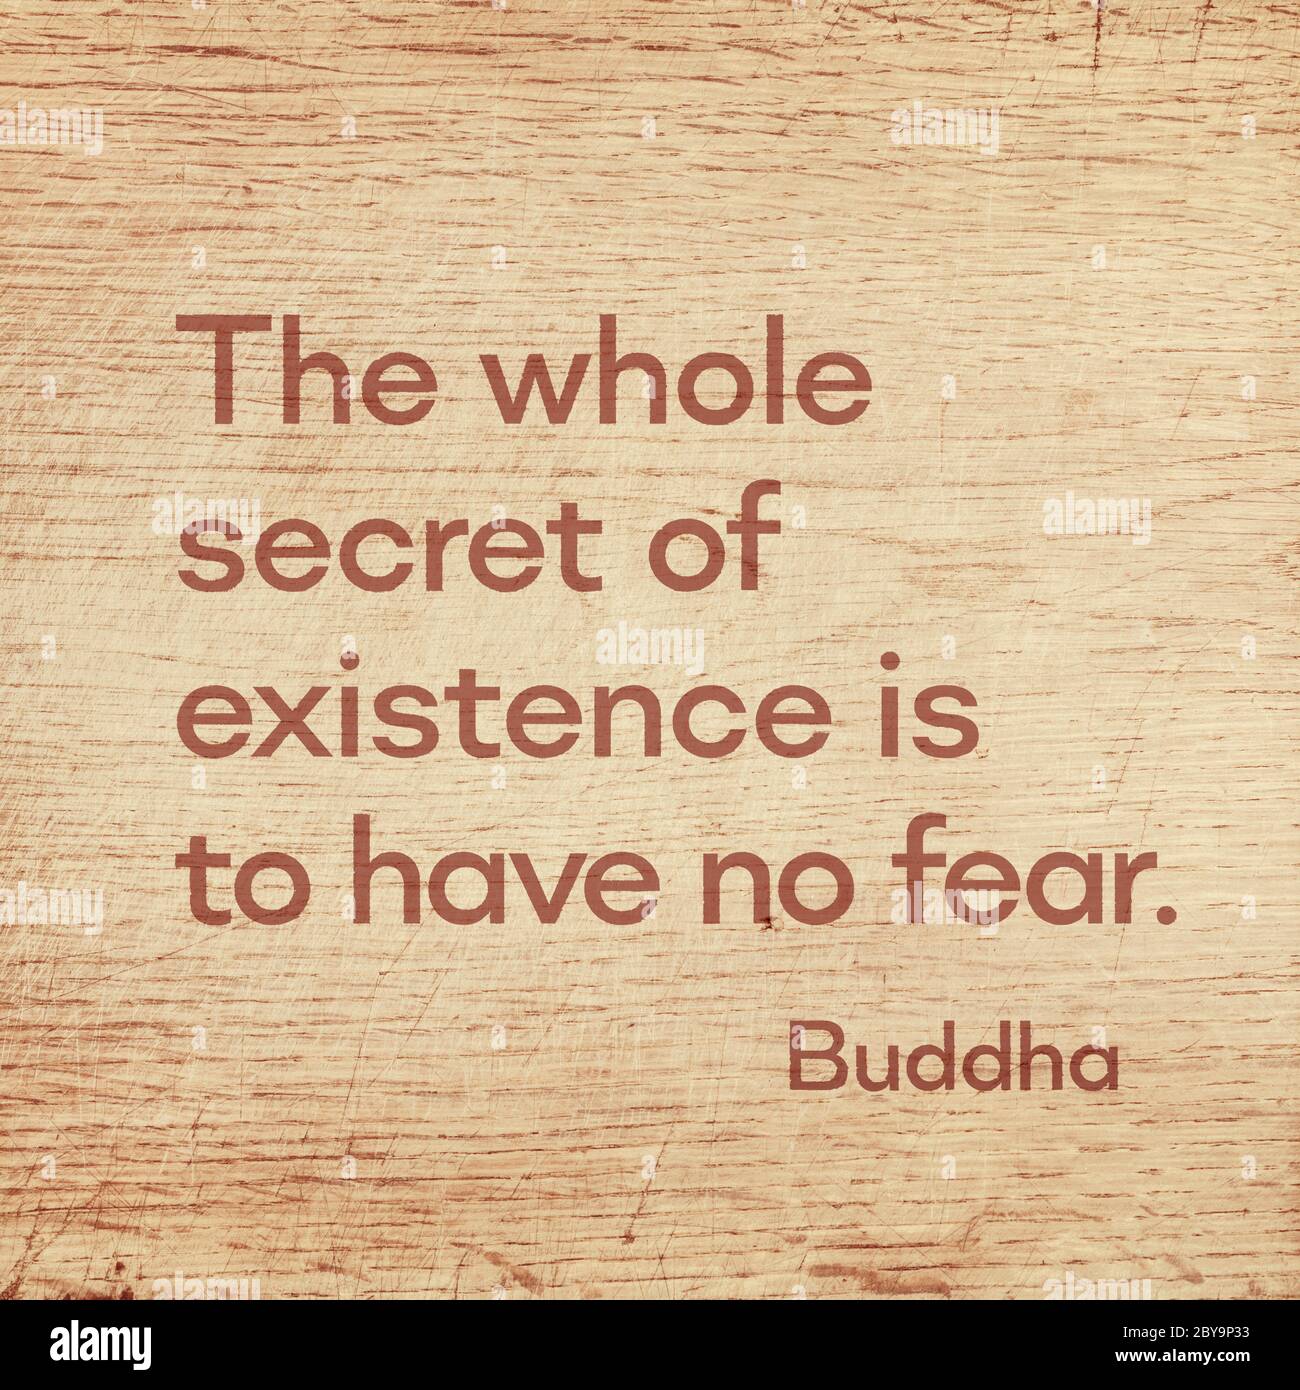 The whole secret of existence is to have no fear - famous quote of Gautama Buddha printed on grunge wooden board Stock Photo